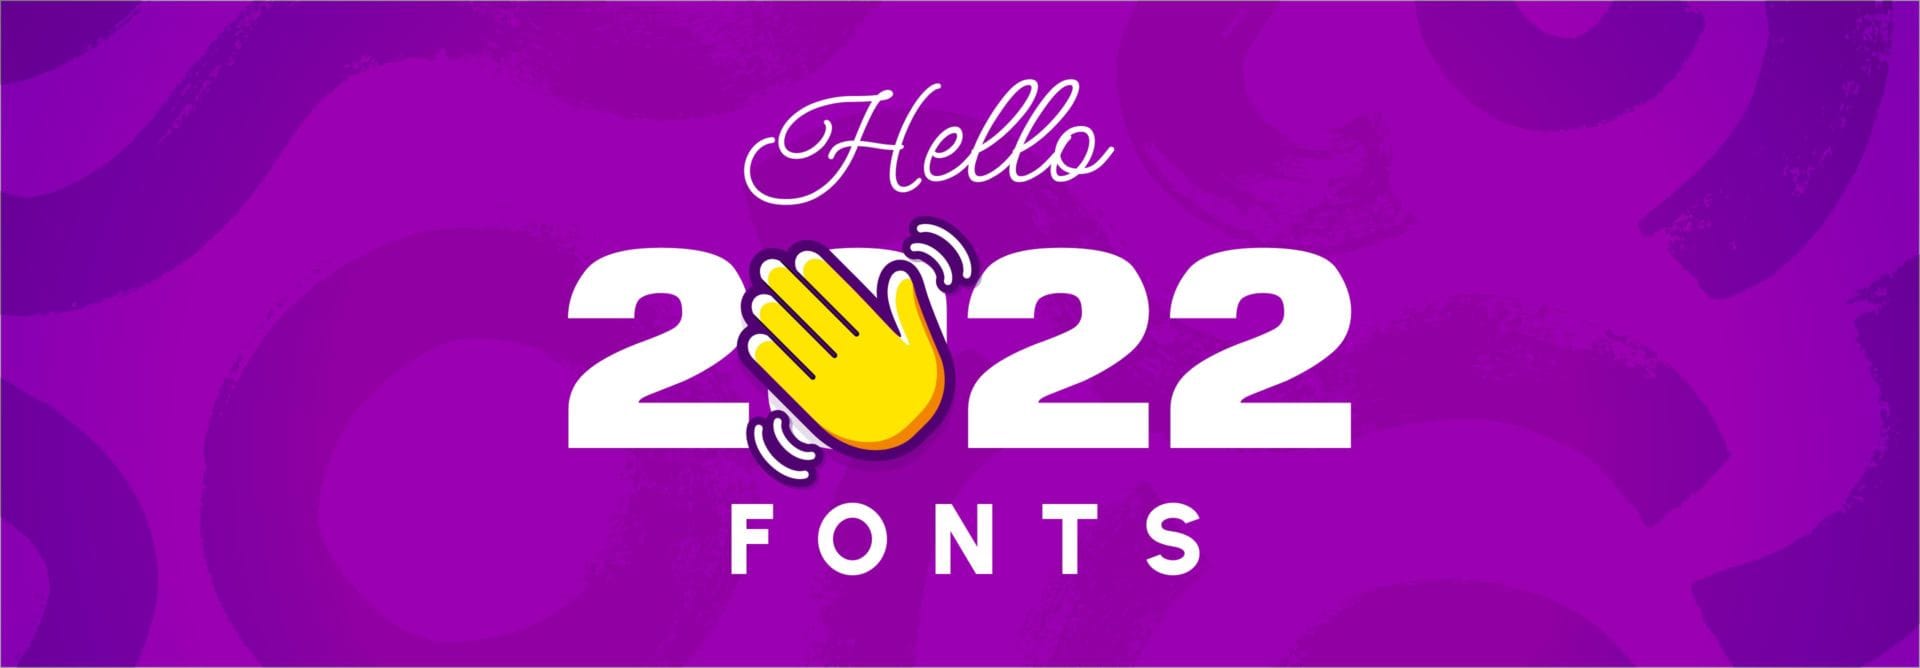 The Best New Google Fonts in 2022